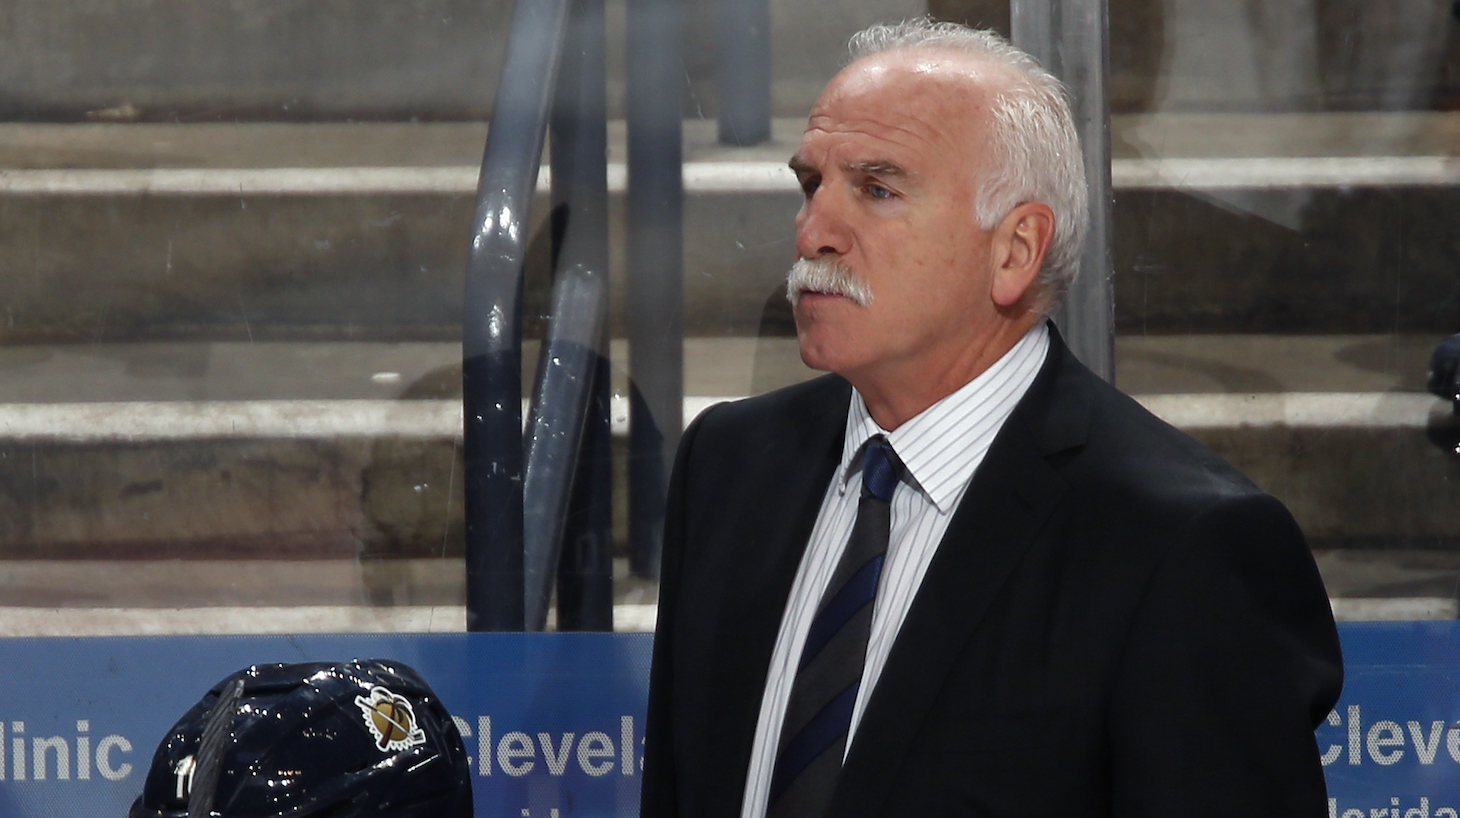 SUNRISE, FL - JANUARY 7: Florida Panthers Head coach Joel Quenneville of the Florida Panthers looks on during third period action against the Arizona Coyote at the BB&amp;T Center on January 7, 2020 in Sunrise, Florida. the Coyotes defeated the Panthers 5-2. (Photo by Joel Auerbach/Getty Images) *** Local Caption *** Joel Quenneville